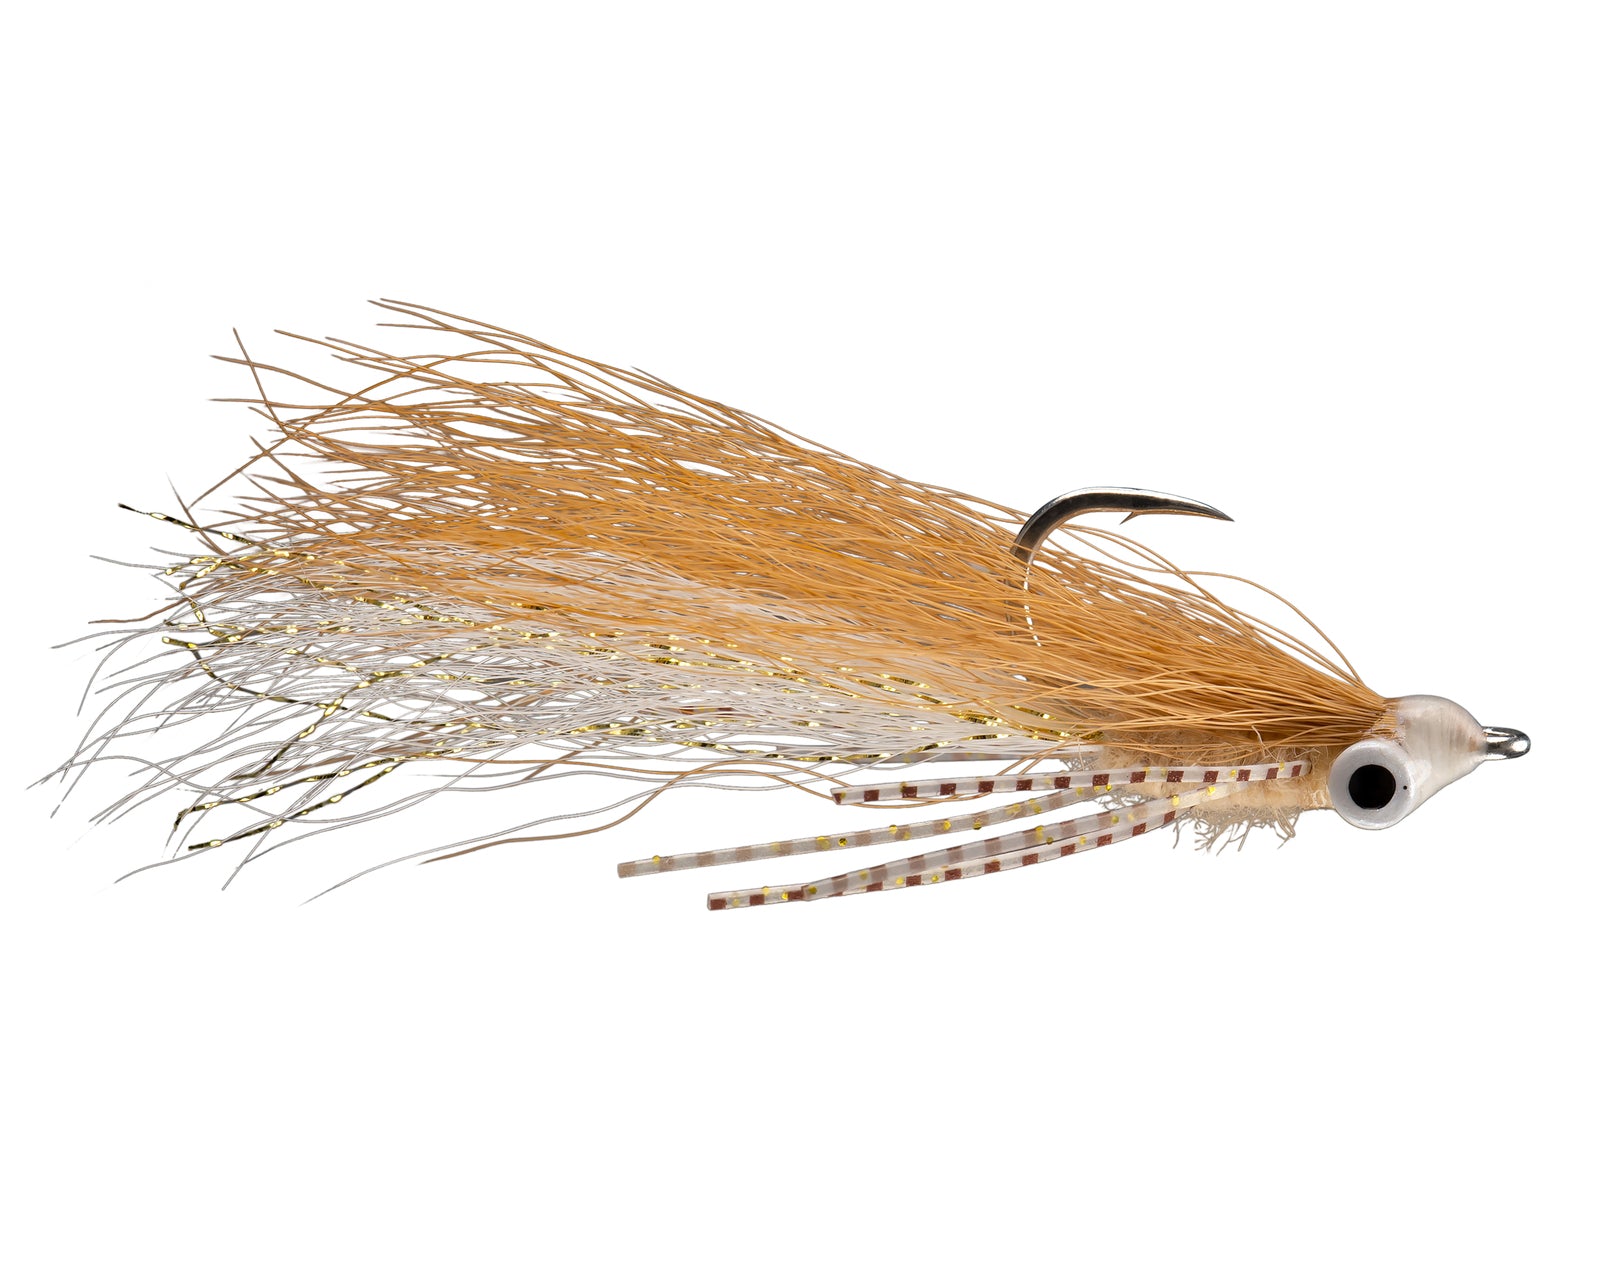 RIO's Webster Crouser in Tan / White - NEW!